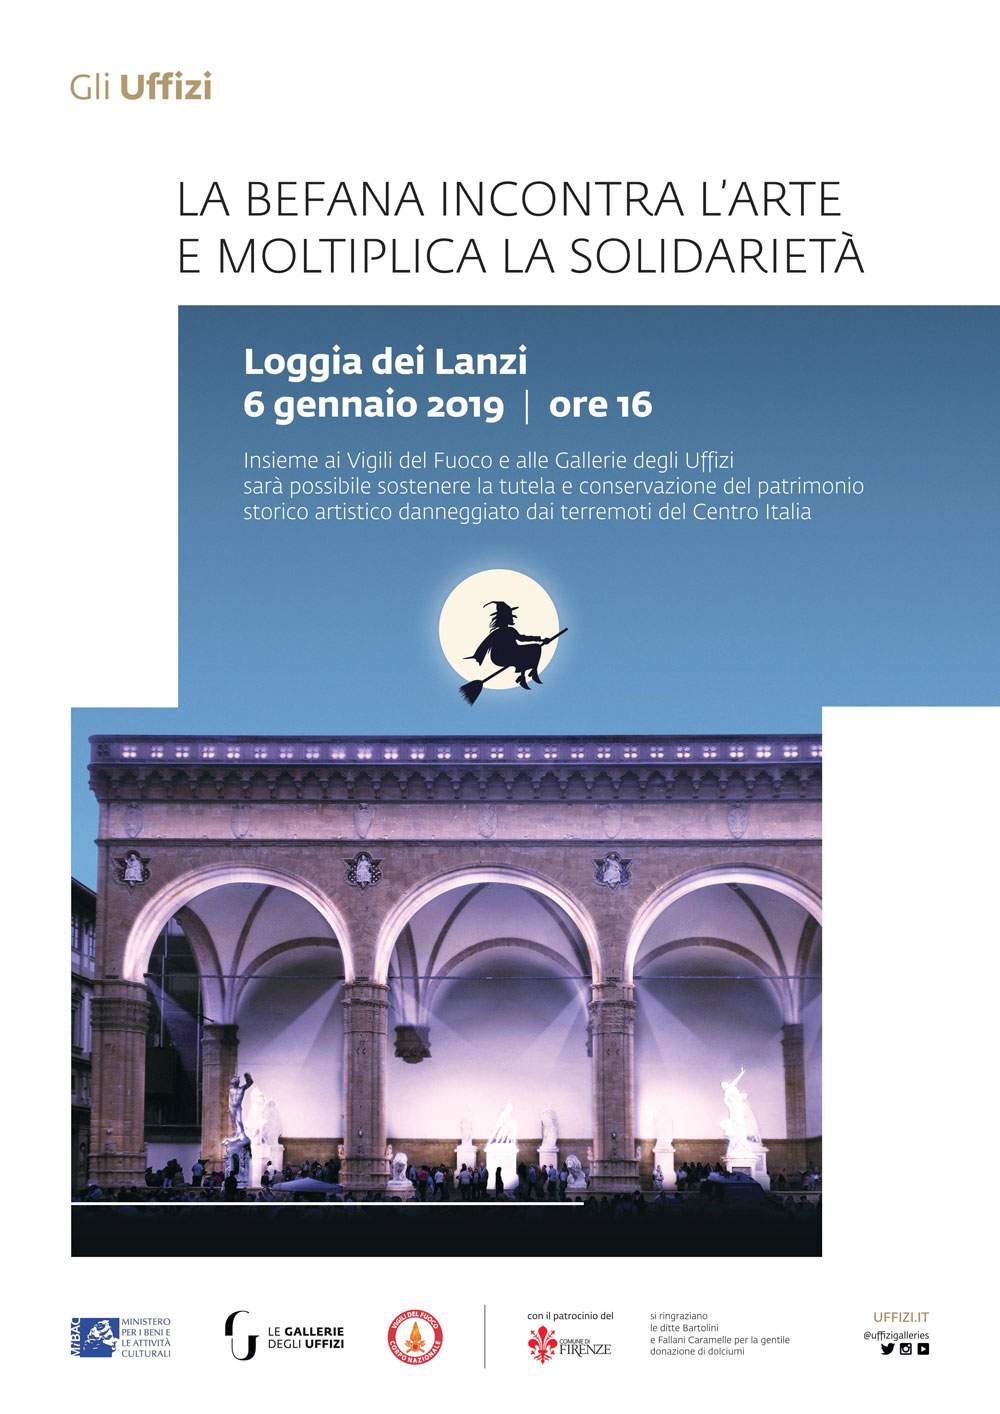 An acrobatic and solidarity Befana is expected at the Loggia dei Lanzi in Florence